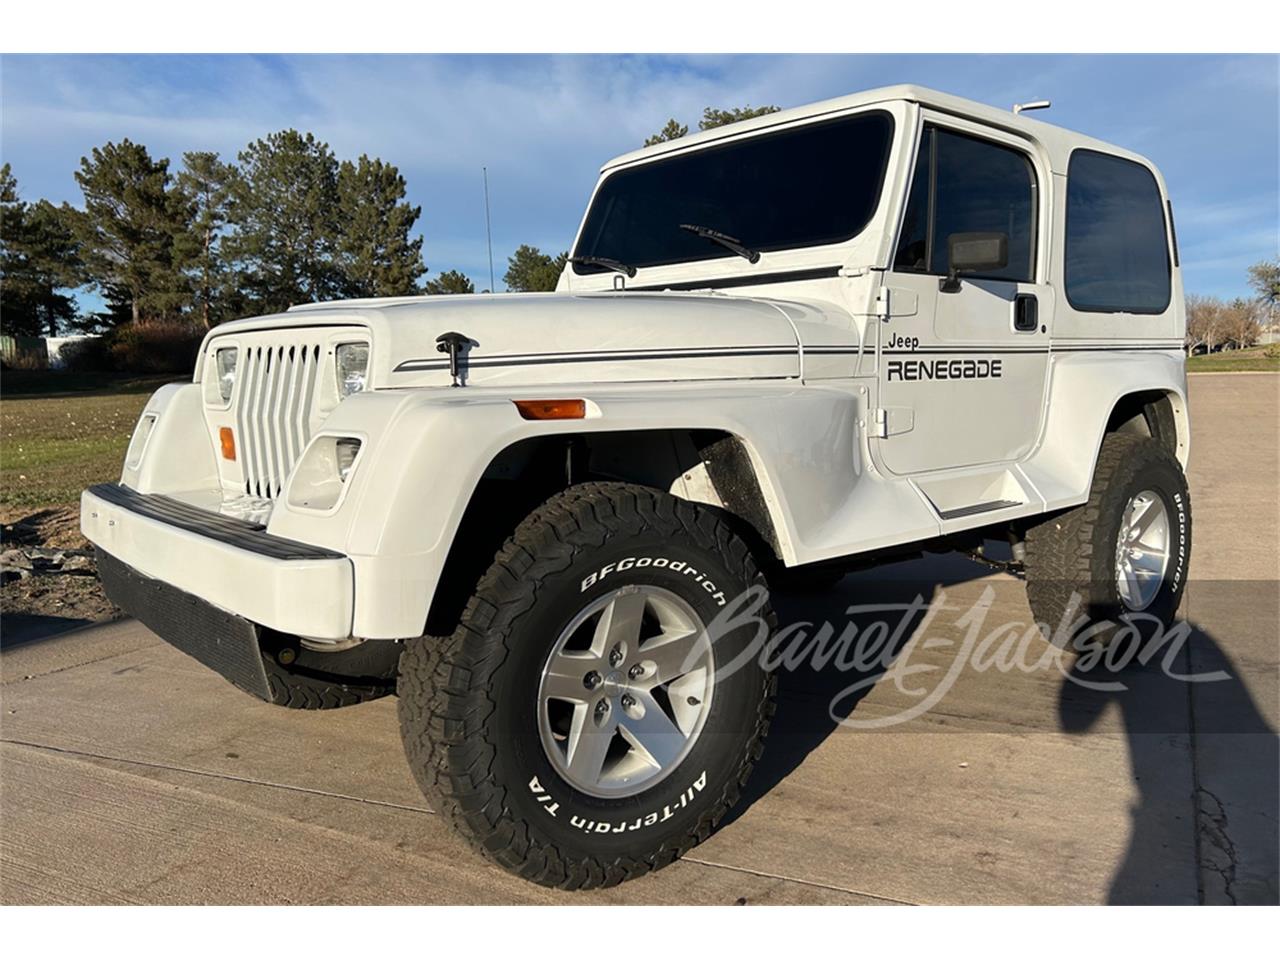 For Sale at Auction: 1991 Jeep Wrangler in Scottsdale, Arizona for sale in Scottsdale, AZ